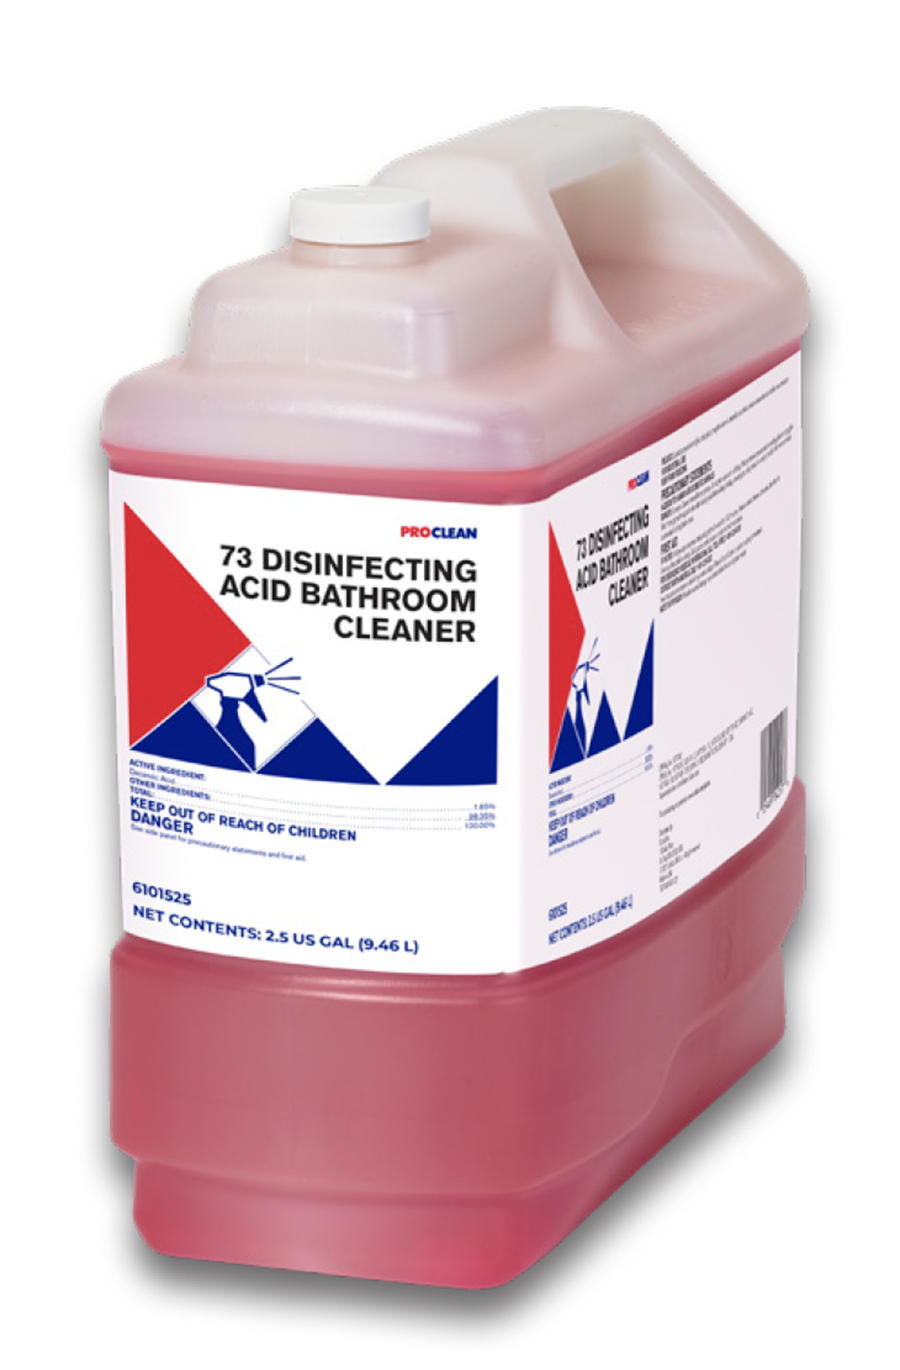 https://www.procleansouthwest.com/-/media/ProClean/Images/ProductImages/73-Disinfecting-Acid-Bathroom-Cleaner-ProClean/ProClean-73-Disinfecting-Acid-Bathroom-Cleaner.ashx